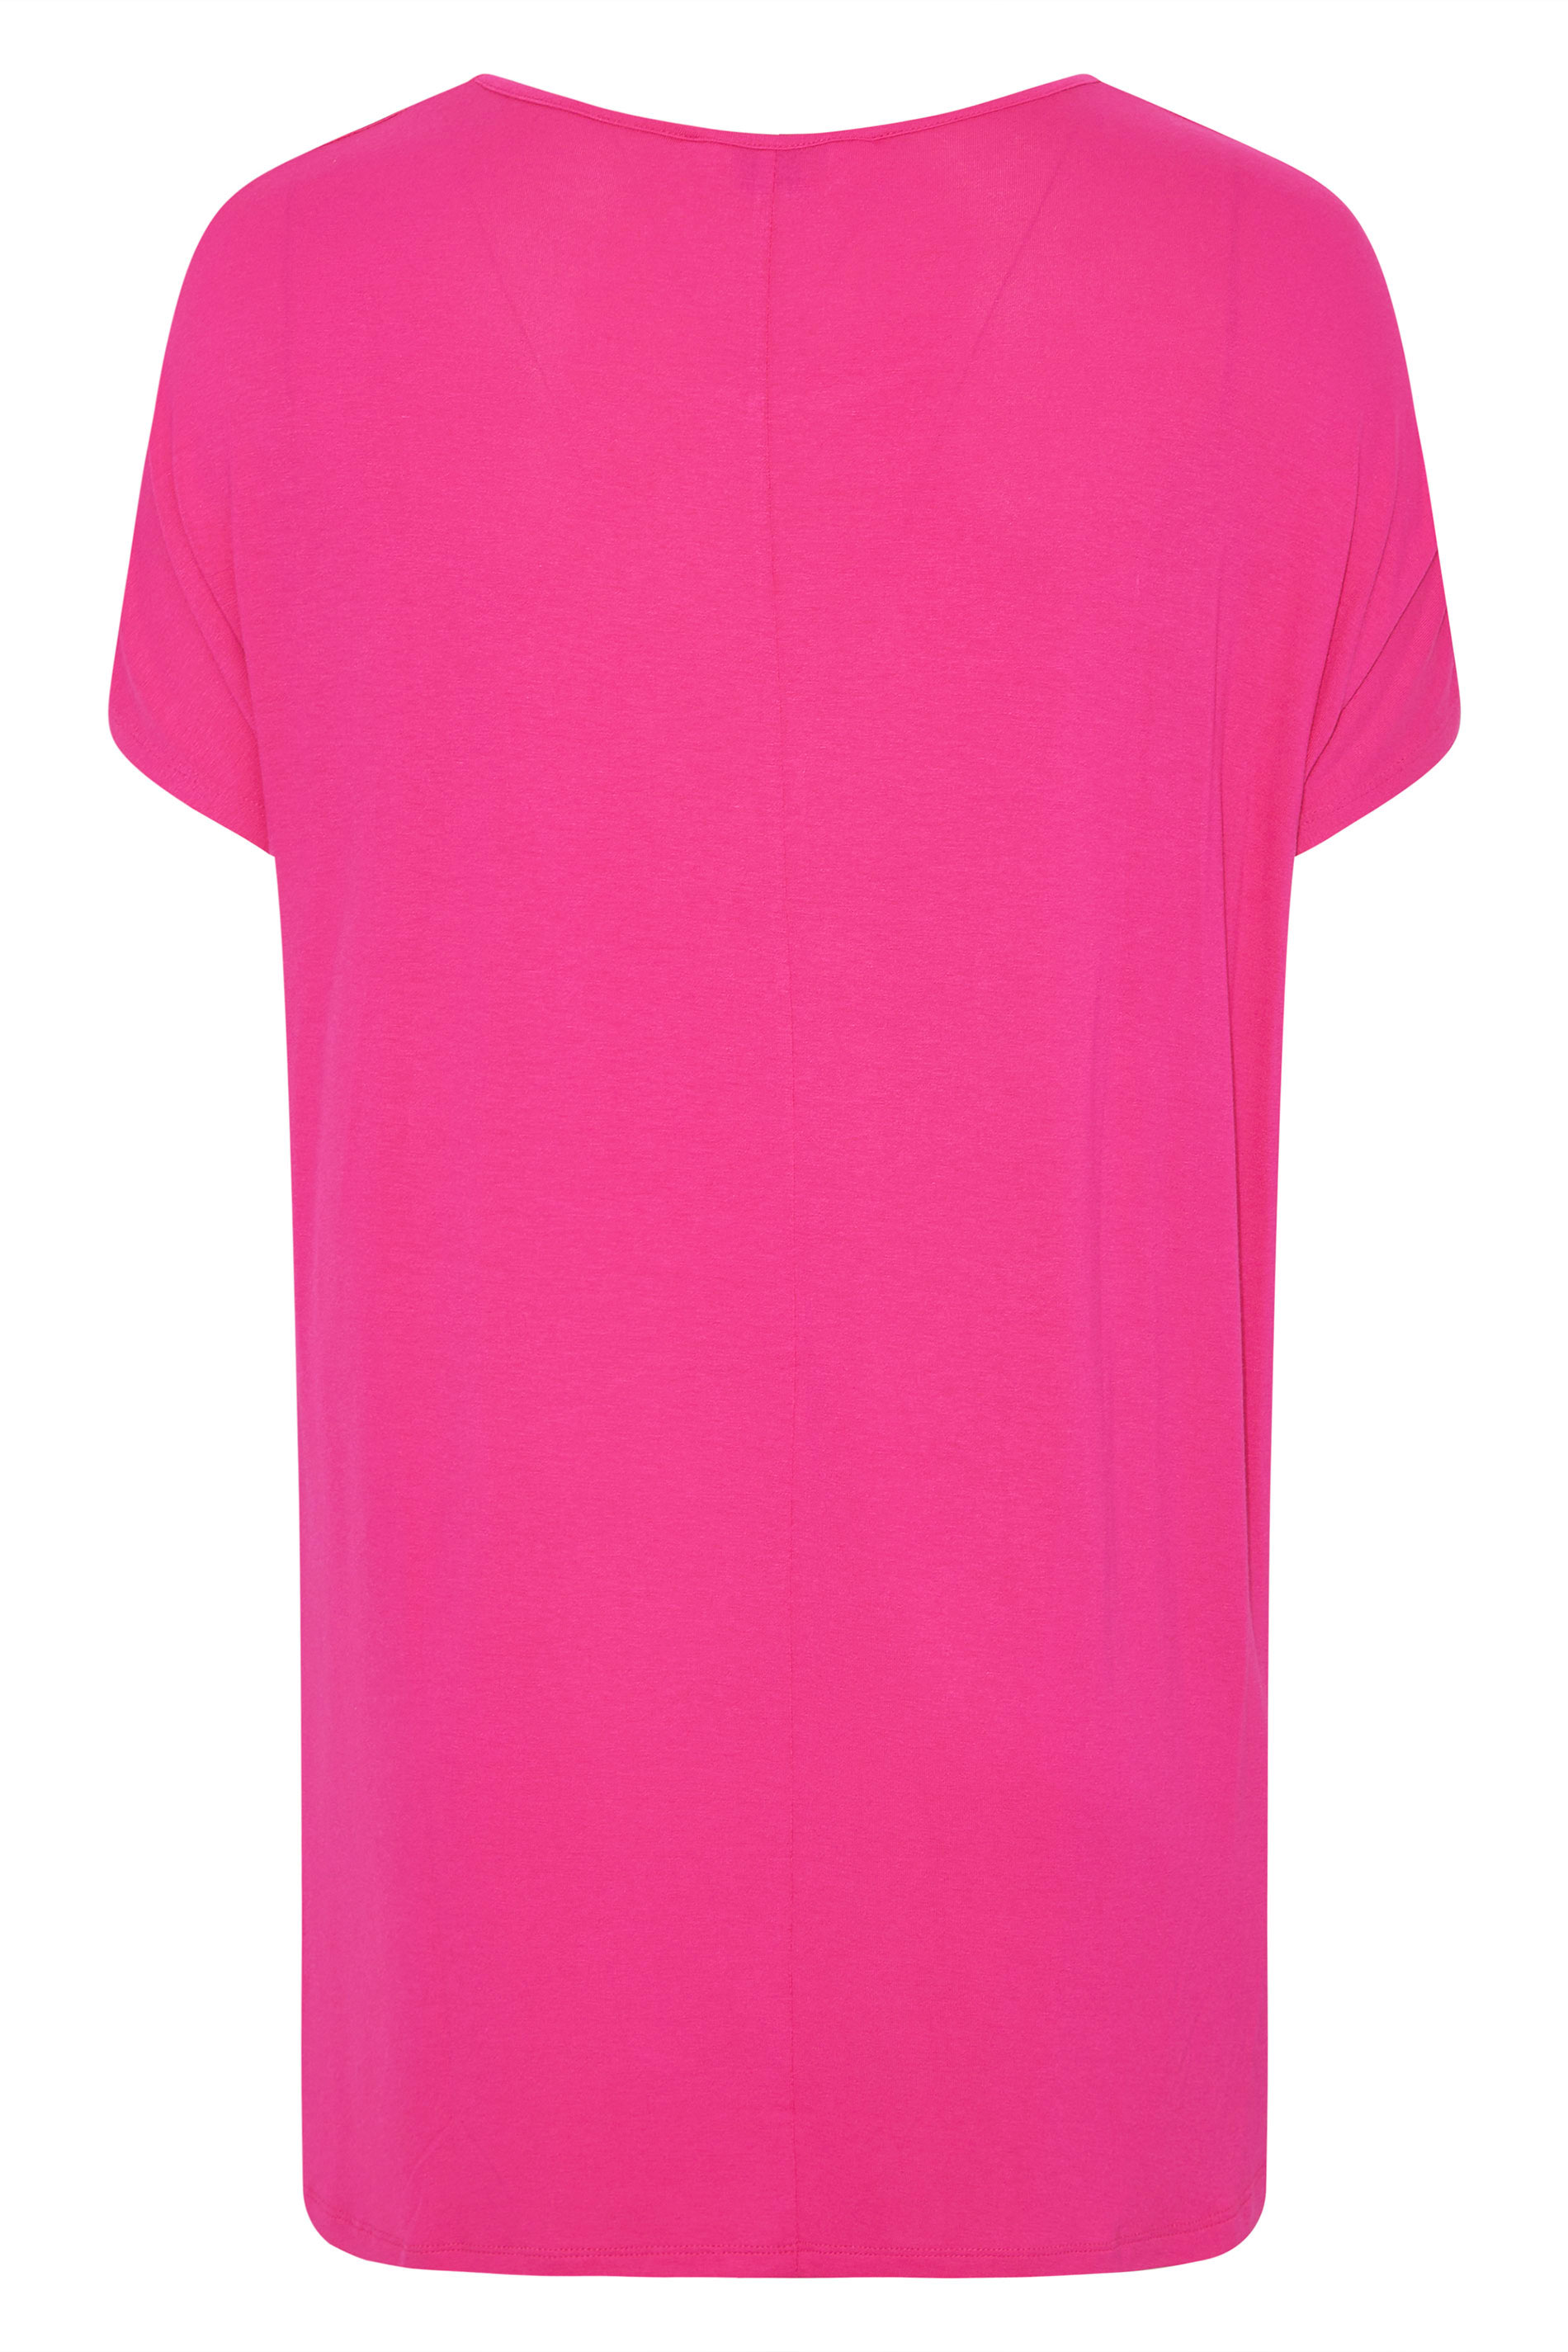 Grande taille  Tops Grande taille  T-Shirts | T-Shirt Rose Flashy Manches Courtes Jersey - JK35109